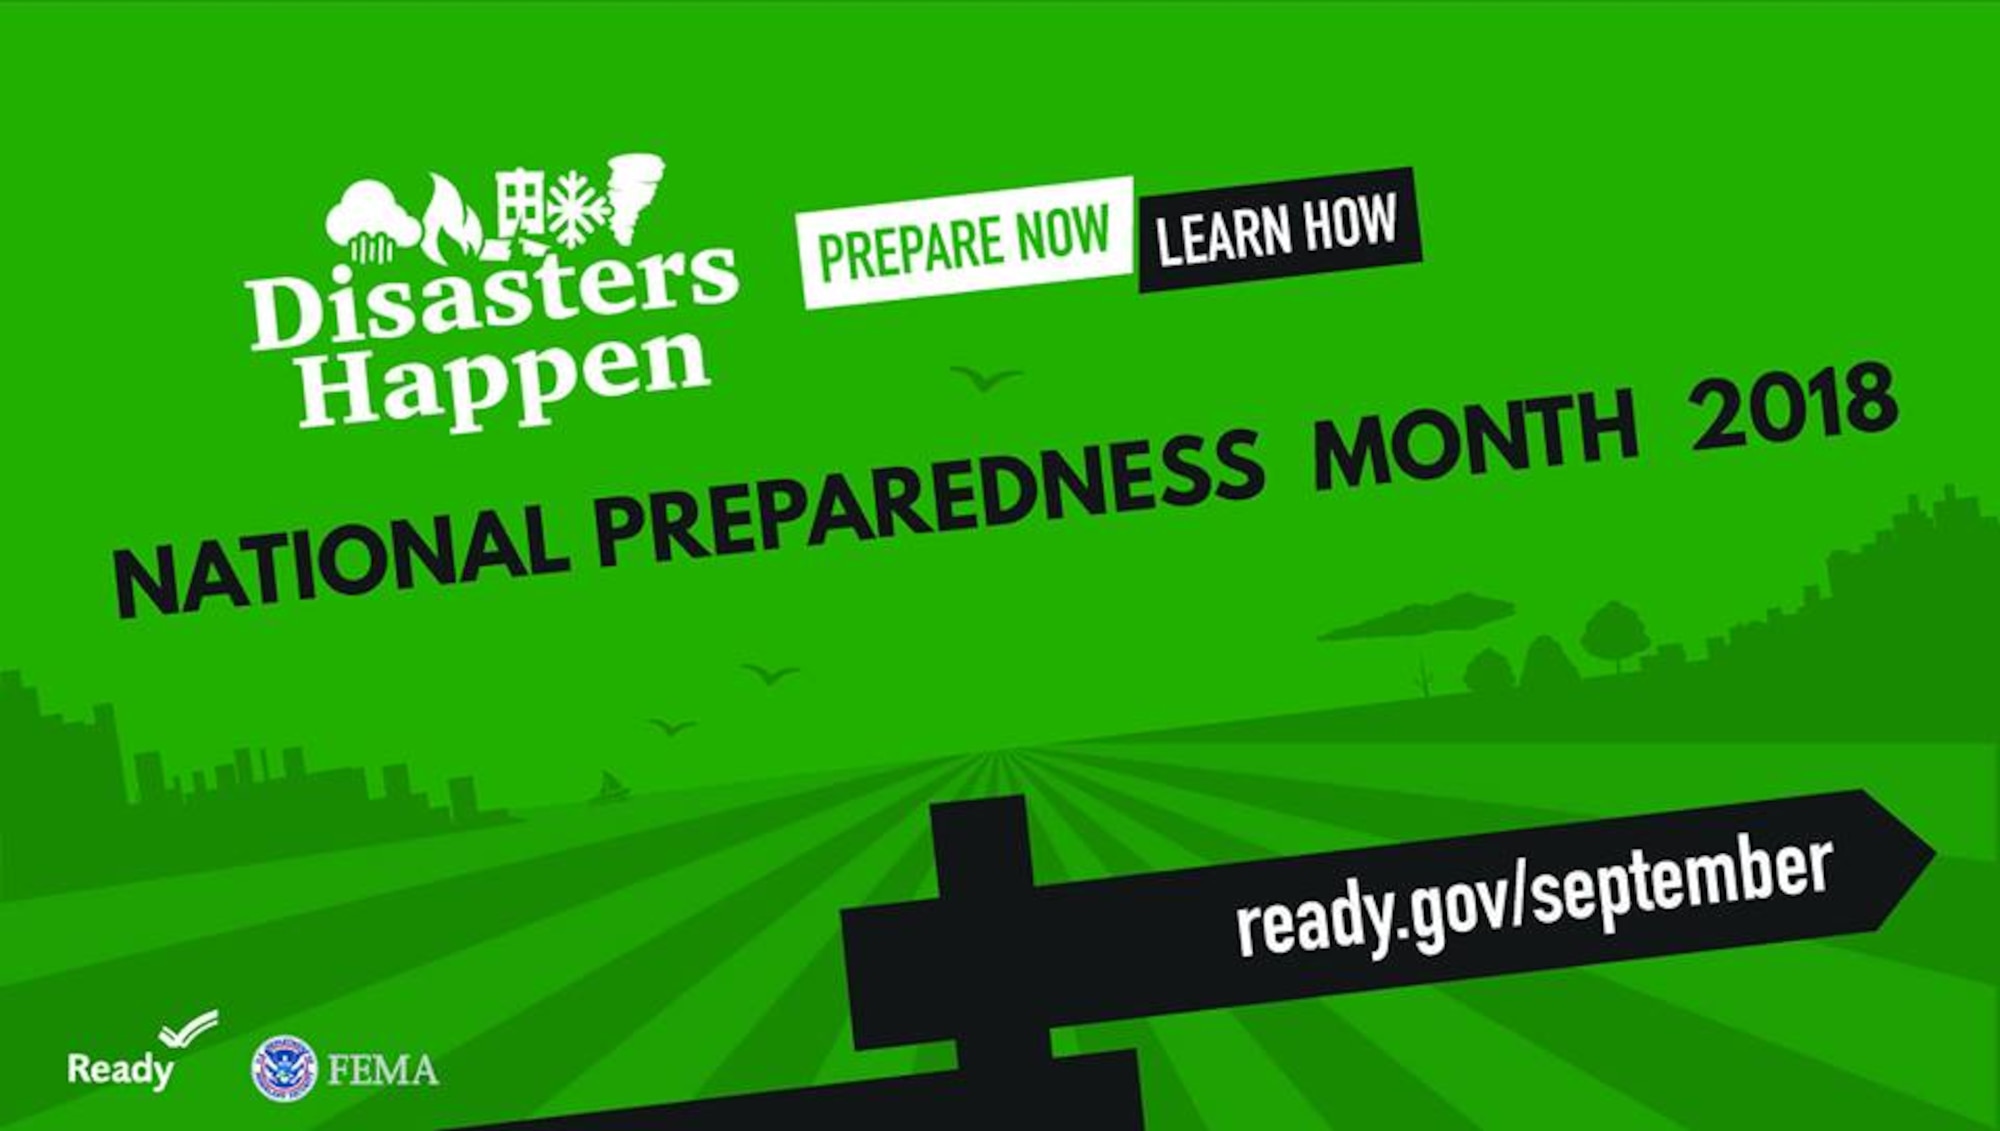 September is recognized as National Preparedness Month, which serves as a reminder to plan and prepare for emergencies that could impact our homes, workplace, schools, and communities. Planning and preparation is essential in building resilient communities and coincides with this year’s theme of “Prepared, Not Scared. Be Ready for Disasters.”